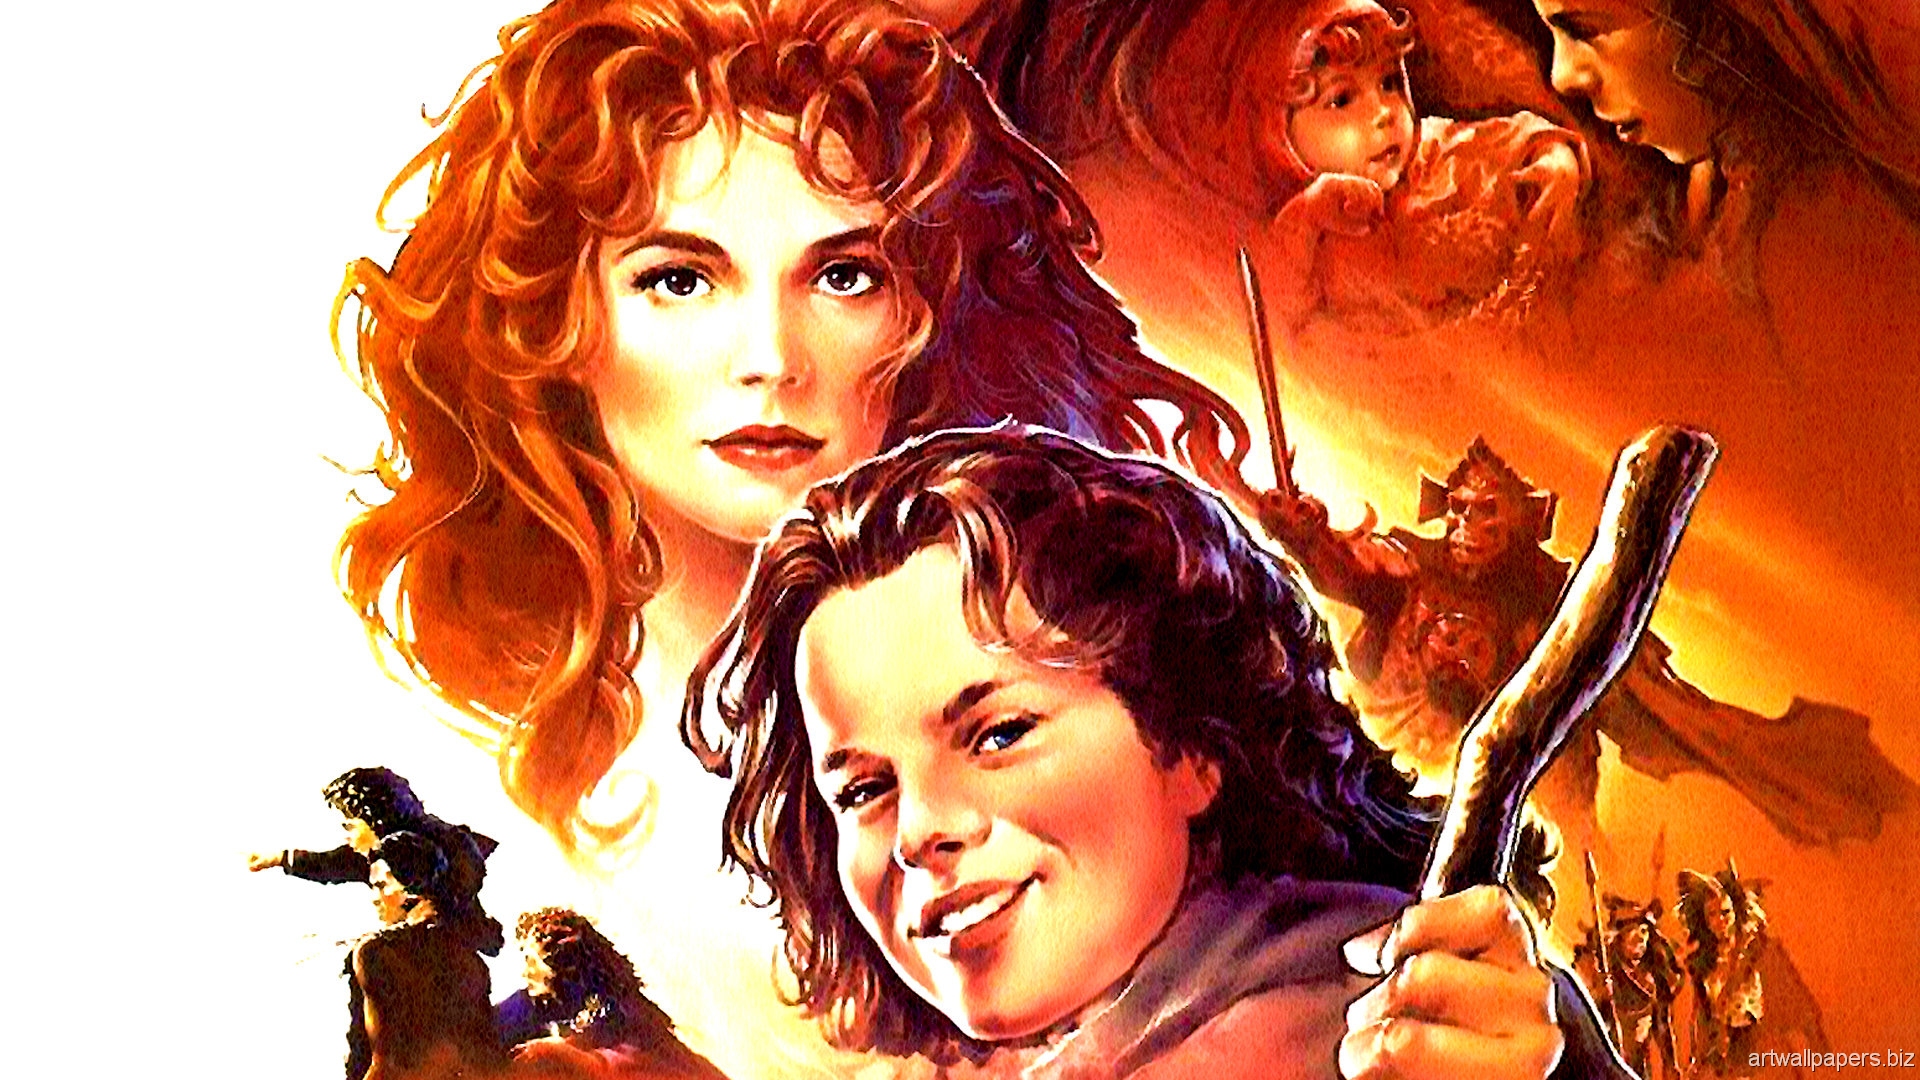 Willow Blu-ray Steelbook is coming to the UK in March